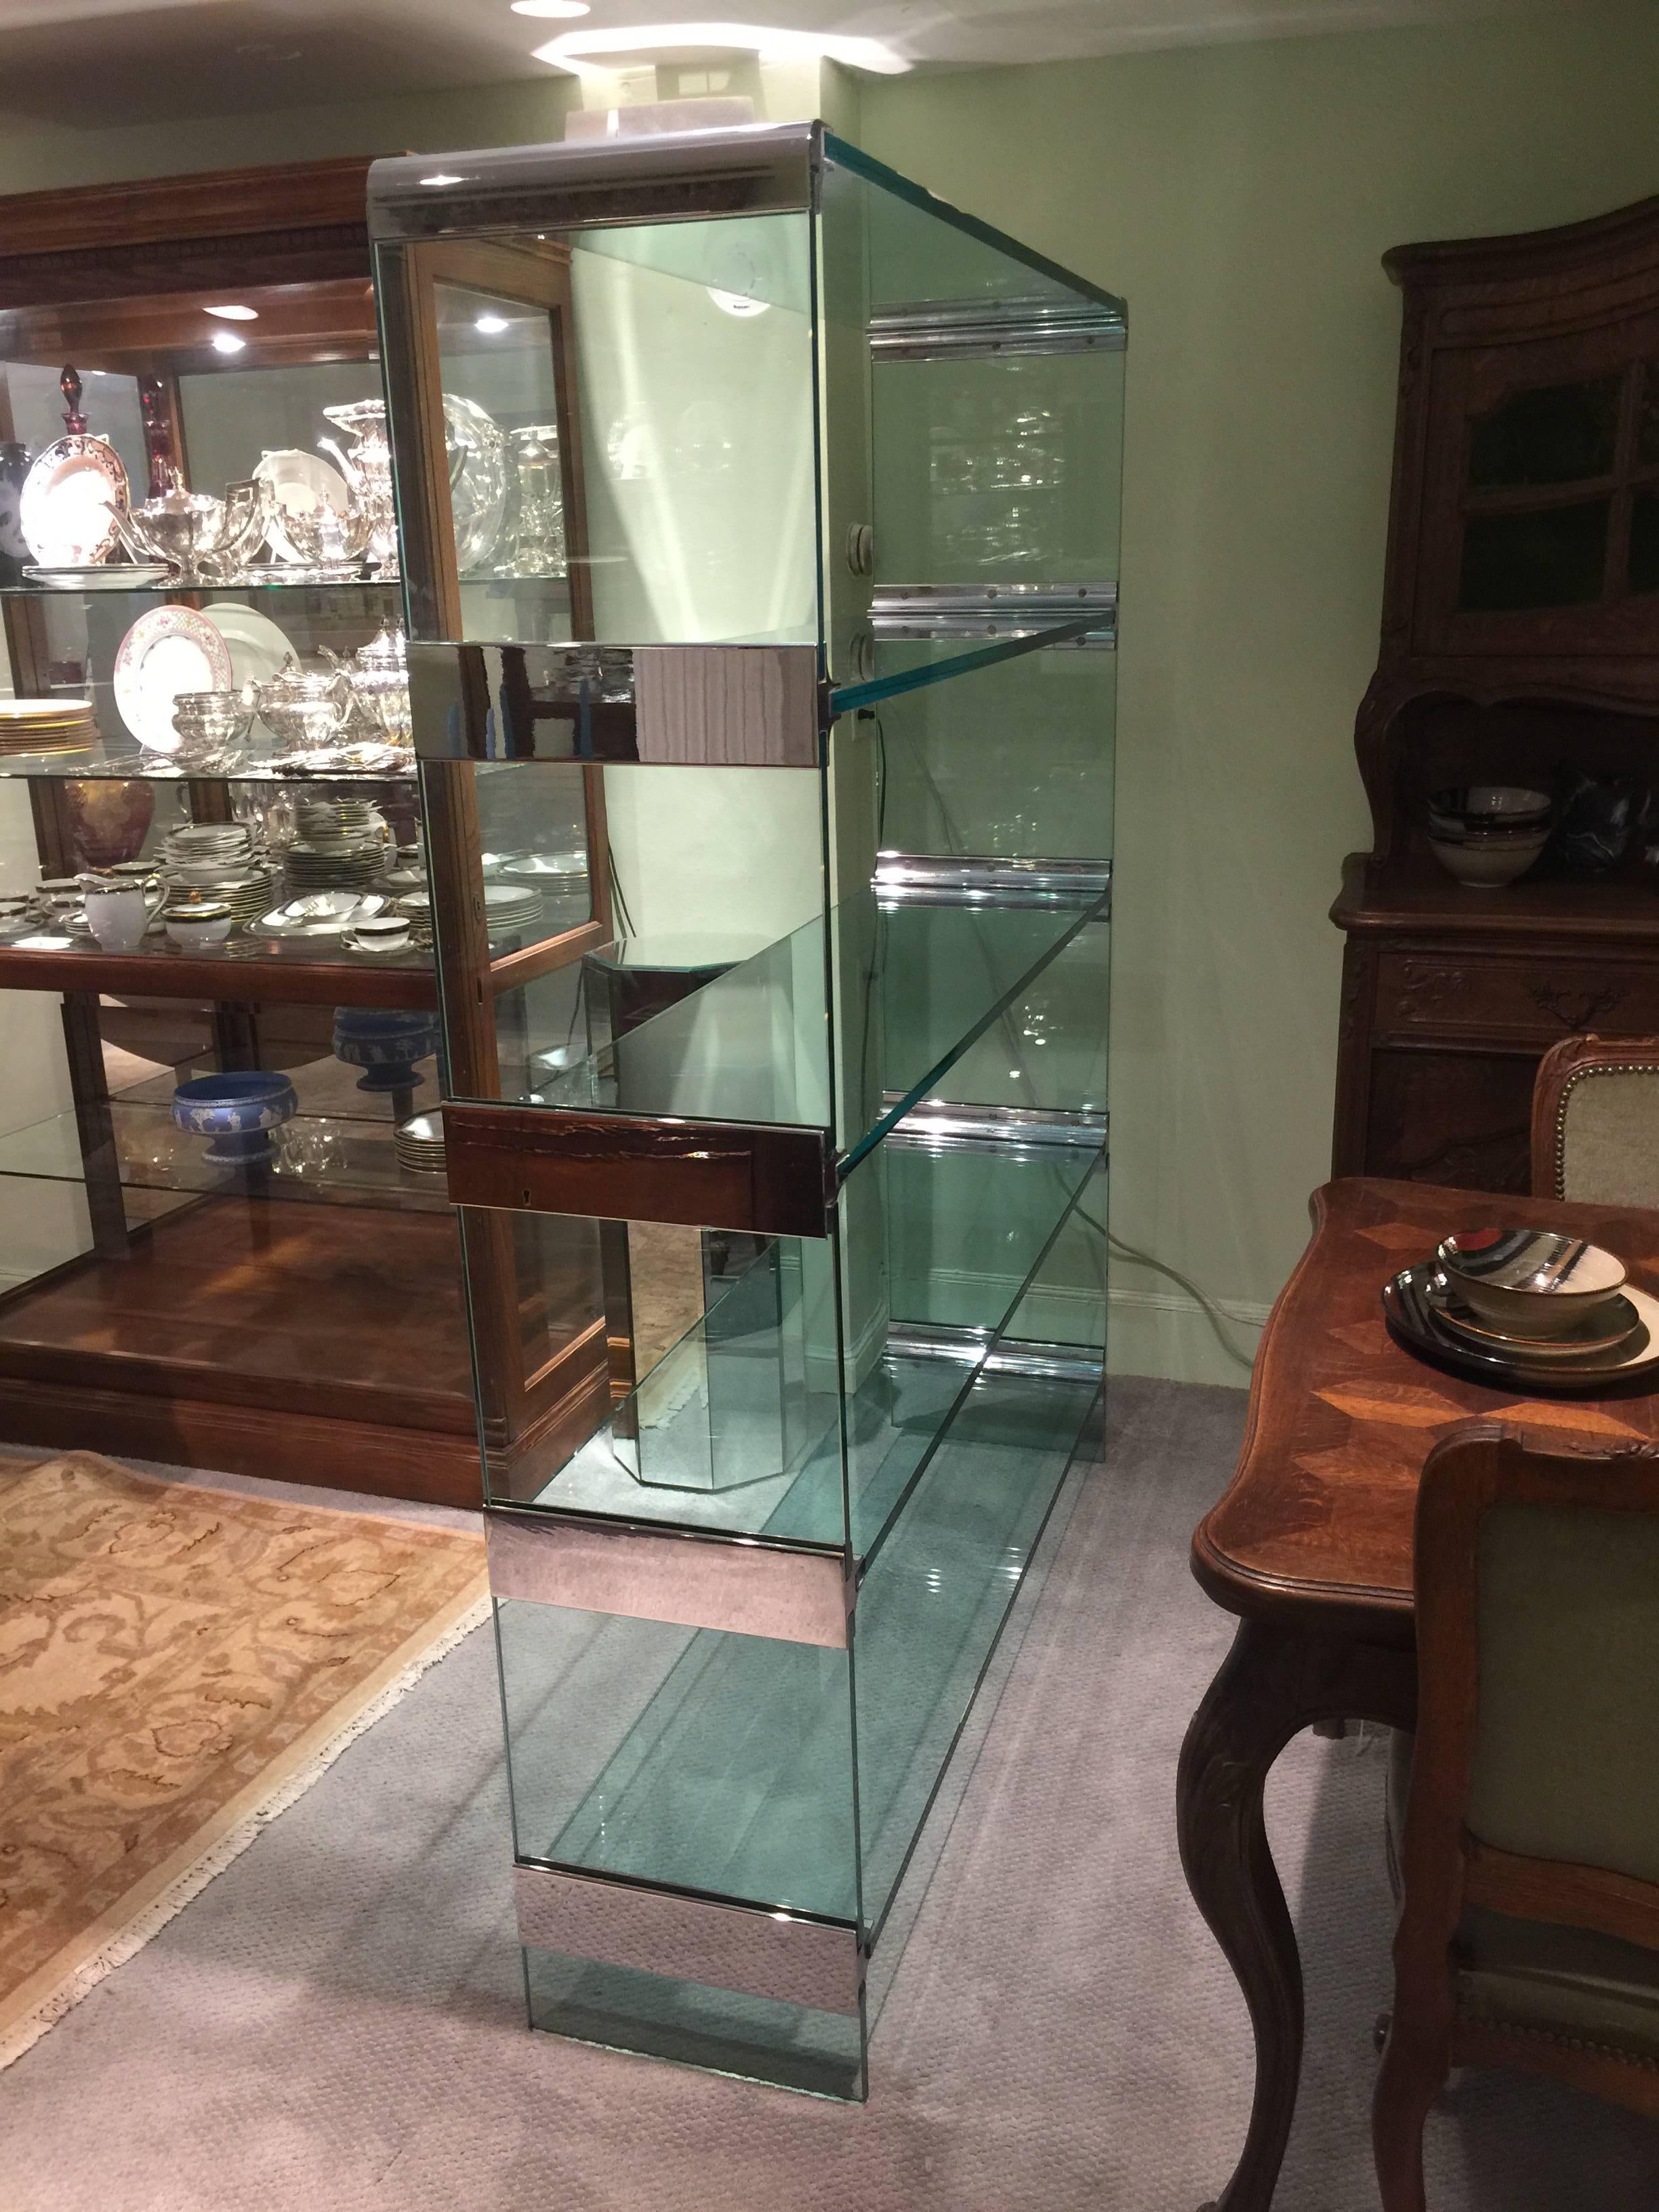 
Large glass and chrome Mid-Century Modern shelving unit by Pace, rare and probably custom-made.
The compartments have a 14 3/4